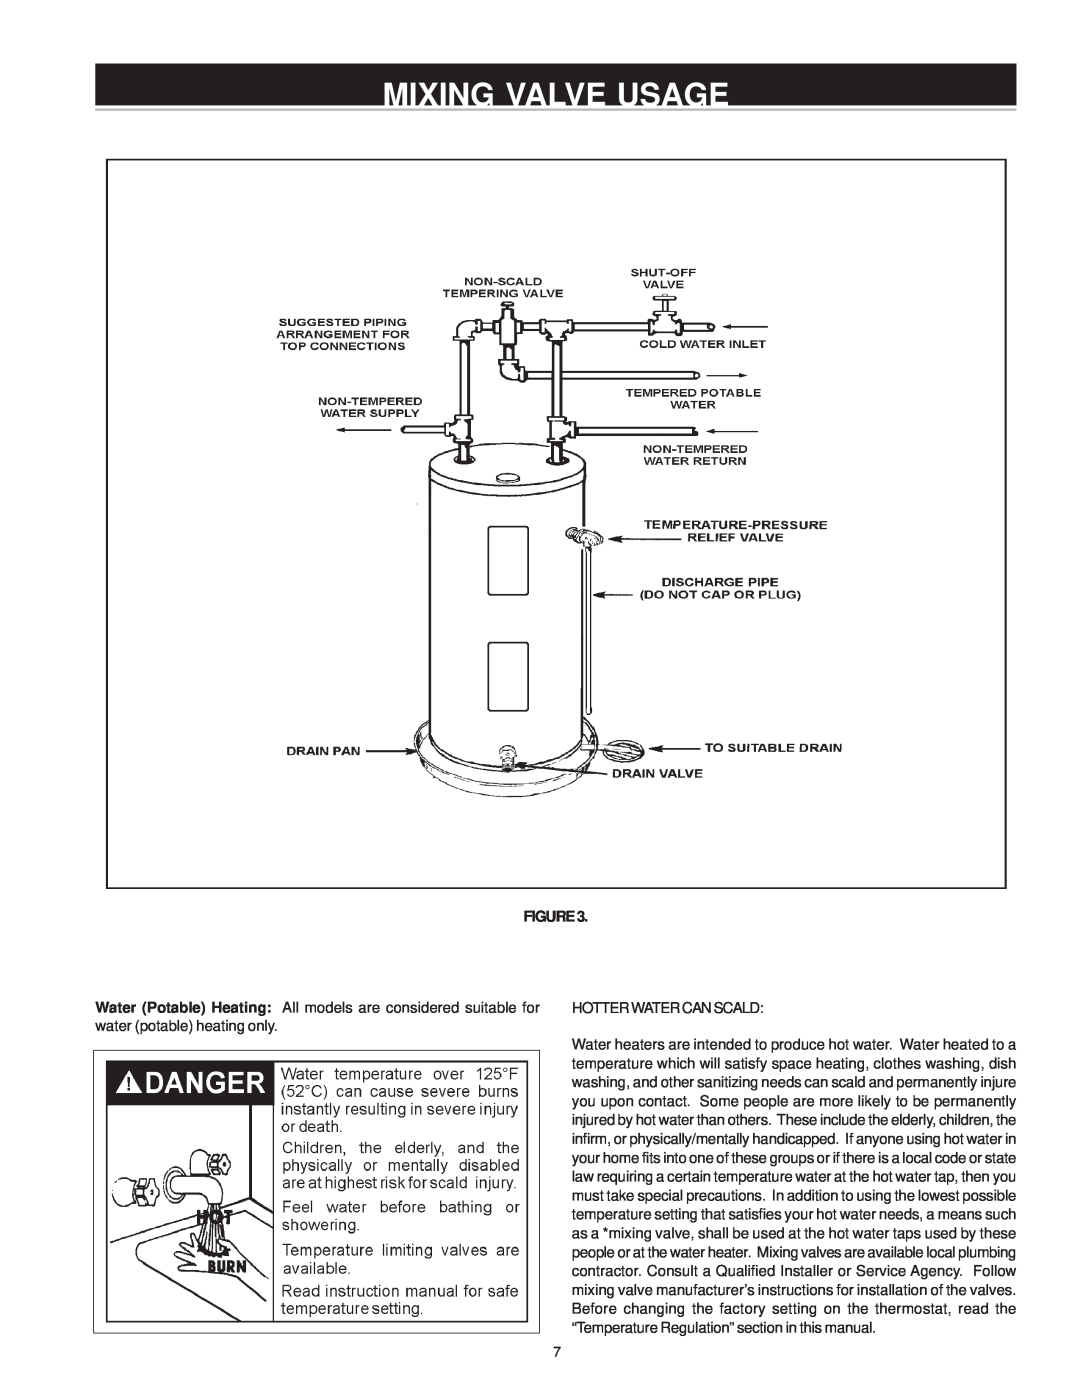 A.O. Smith WATER HEATERS instruction manual Mixing Valve Usage 